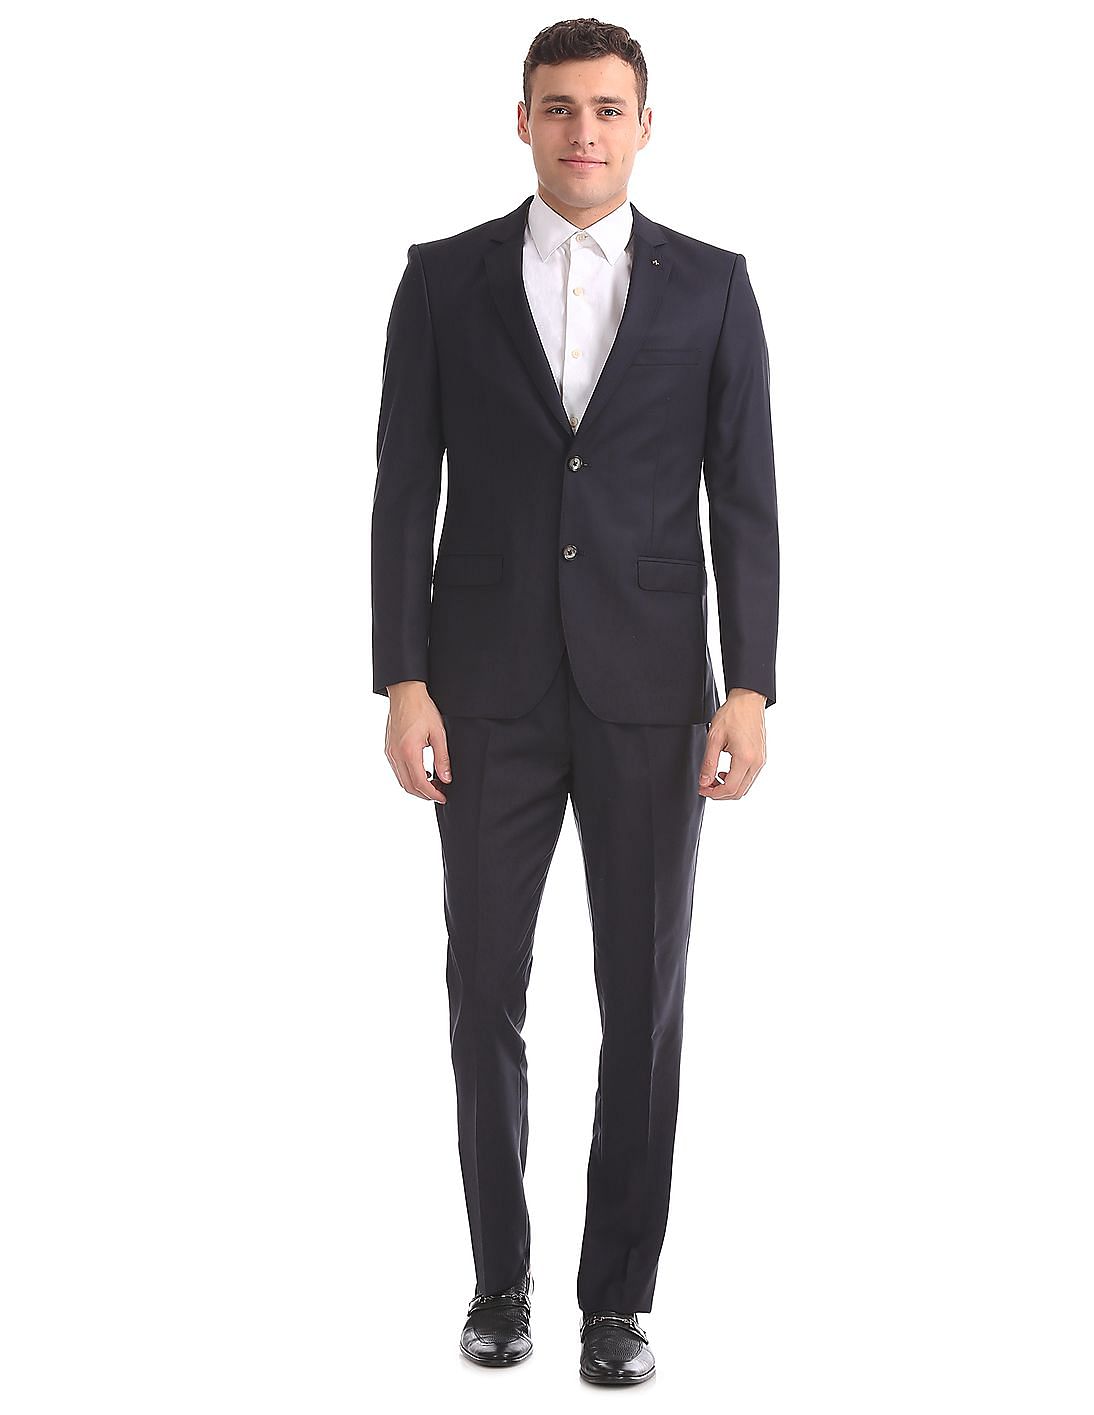 Buy Arrow Regular Fit Single Breasted Two Piece Suit - NNNOW.com